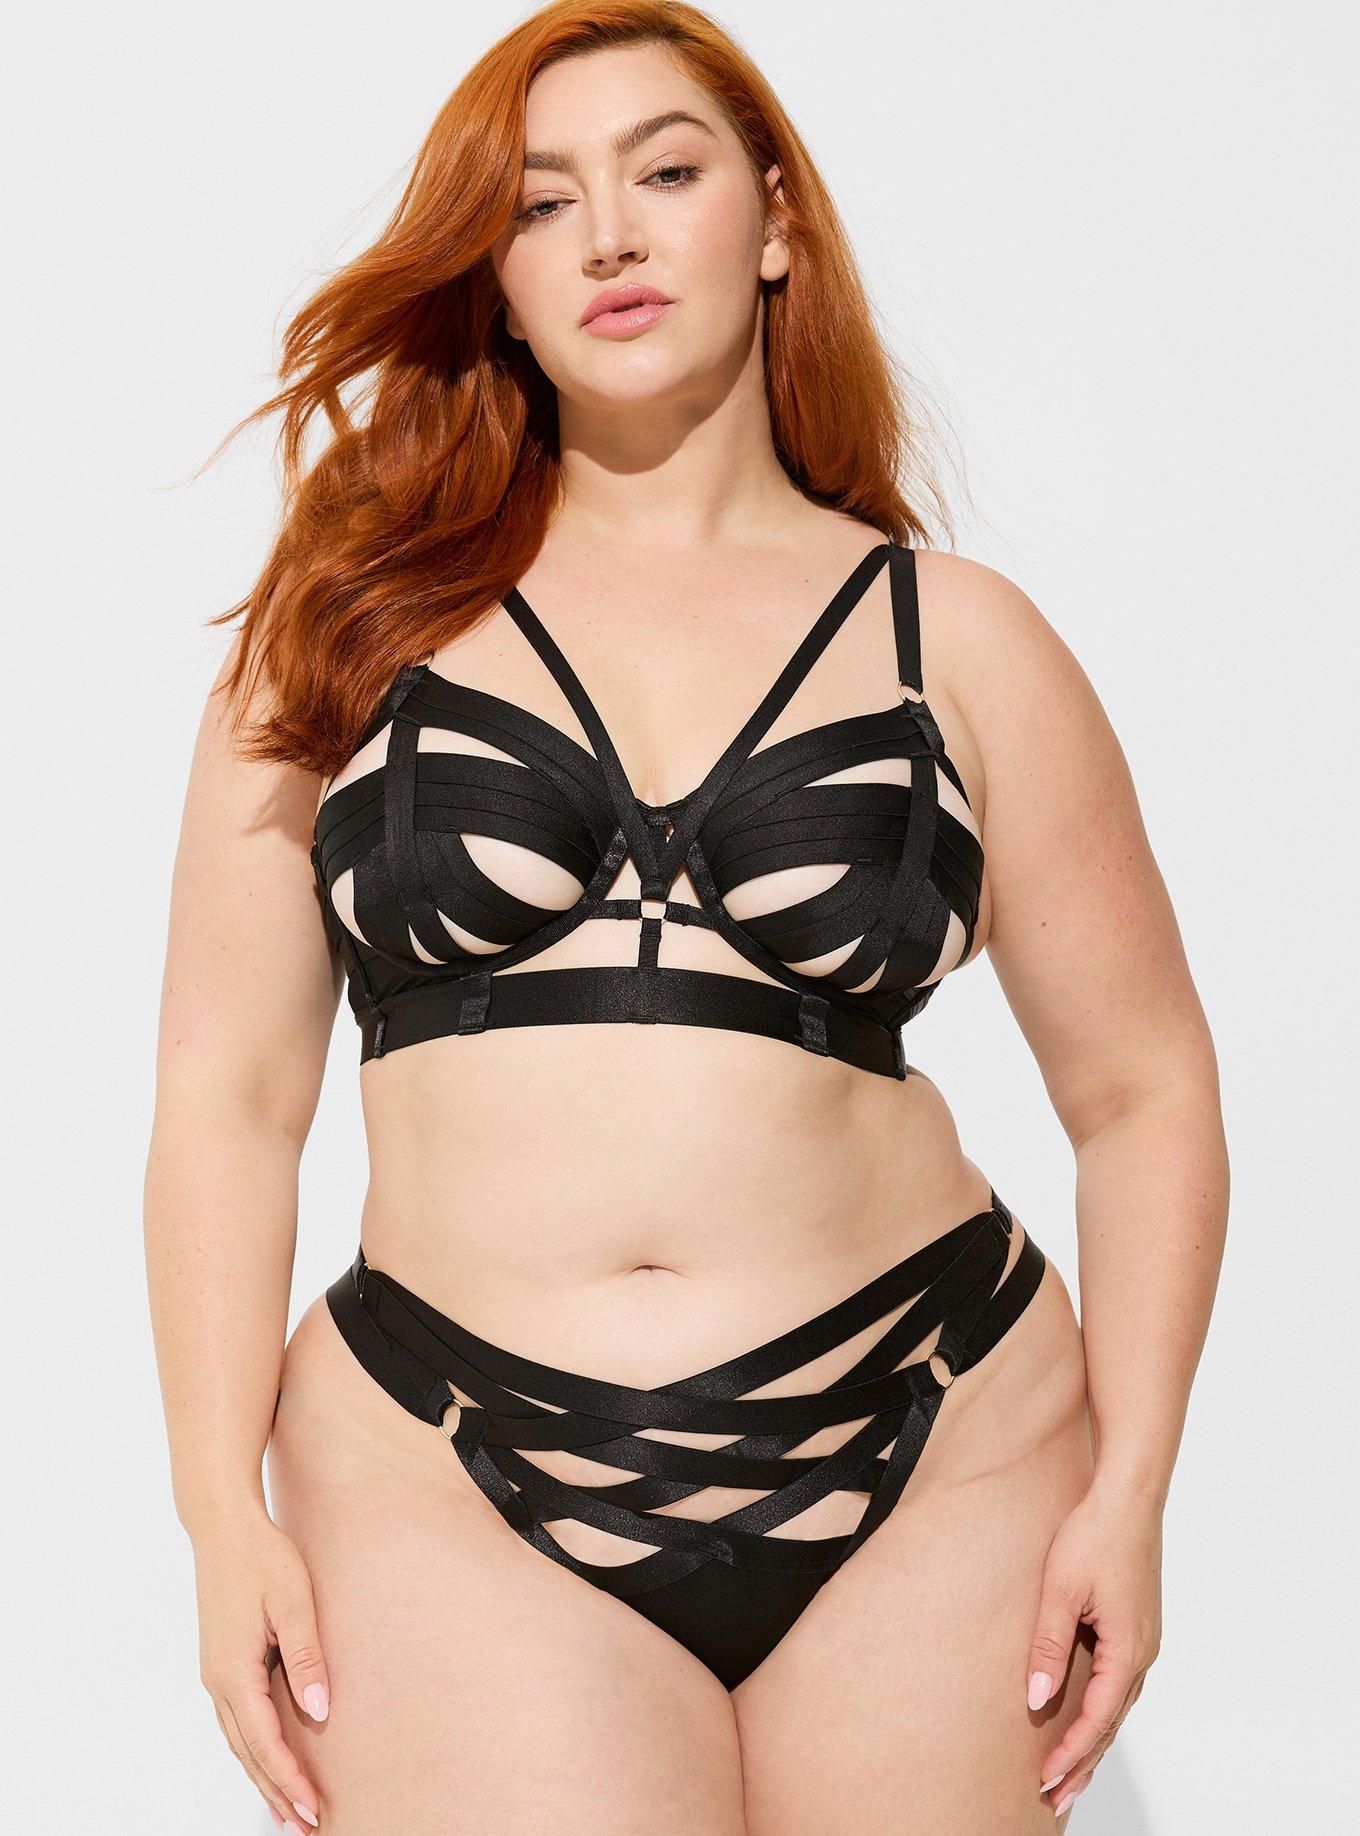 Plus Size - Straps And Rings Satin Underwire Bra With Mesh Cup